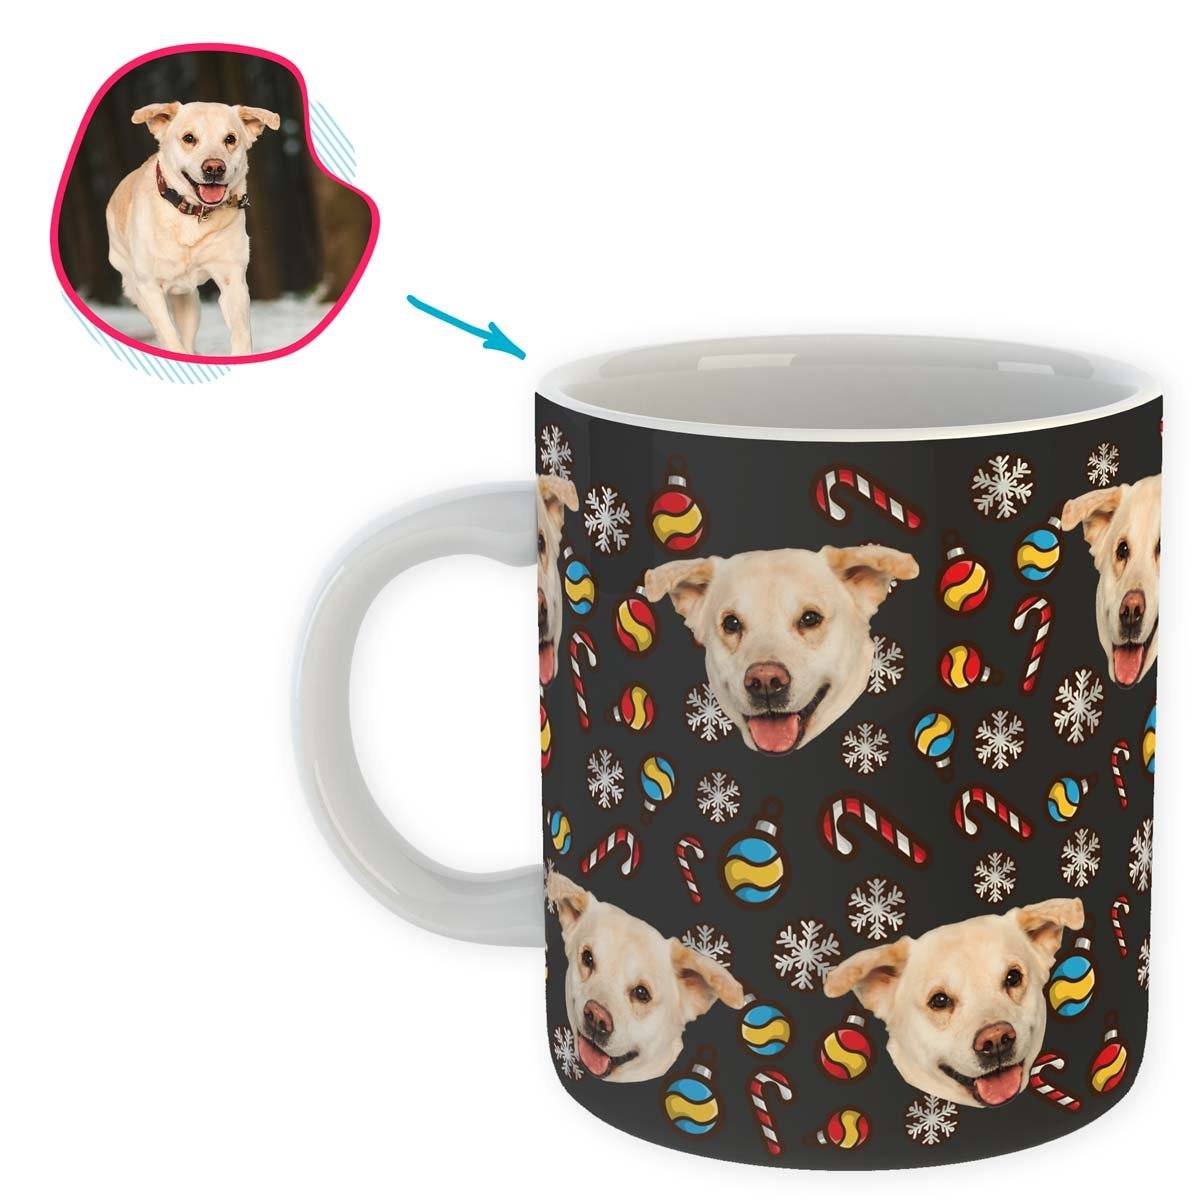 dark Christmas Tree Toy mug personalized with photo of face printed on it